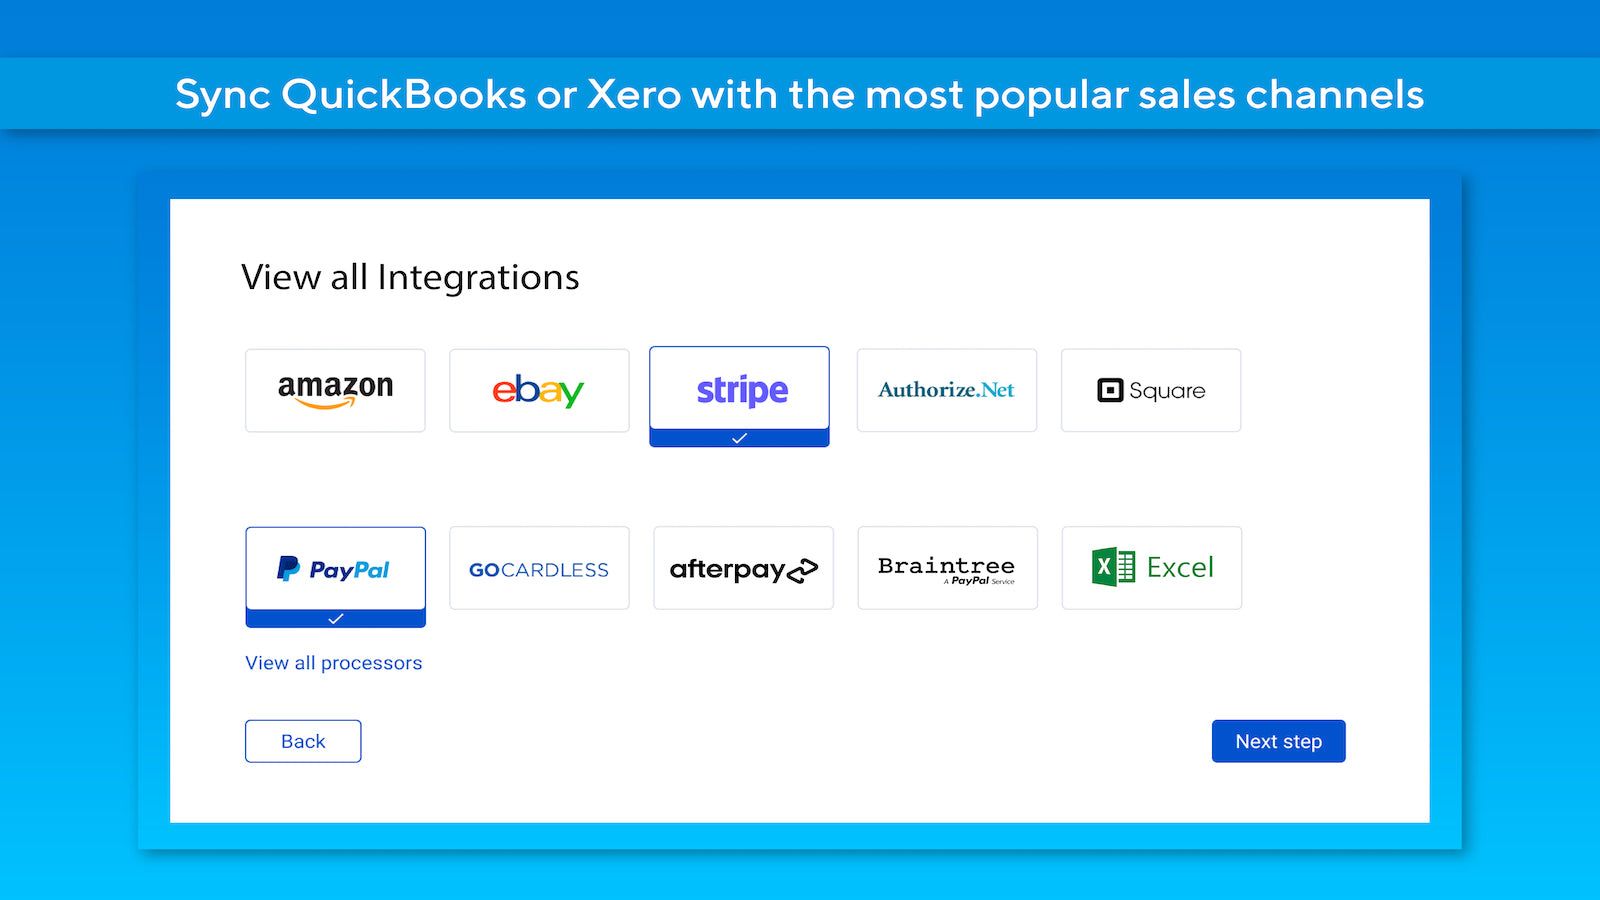 Sync QuickBooks or Xero with the most popular sales channels